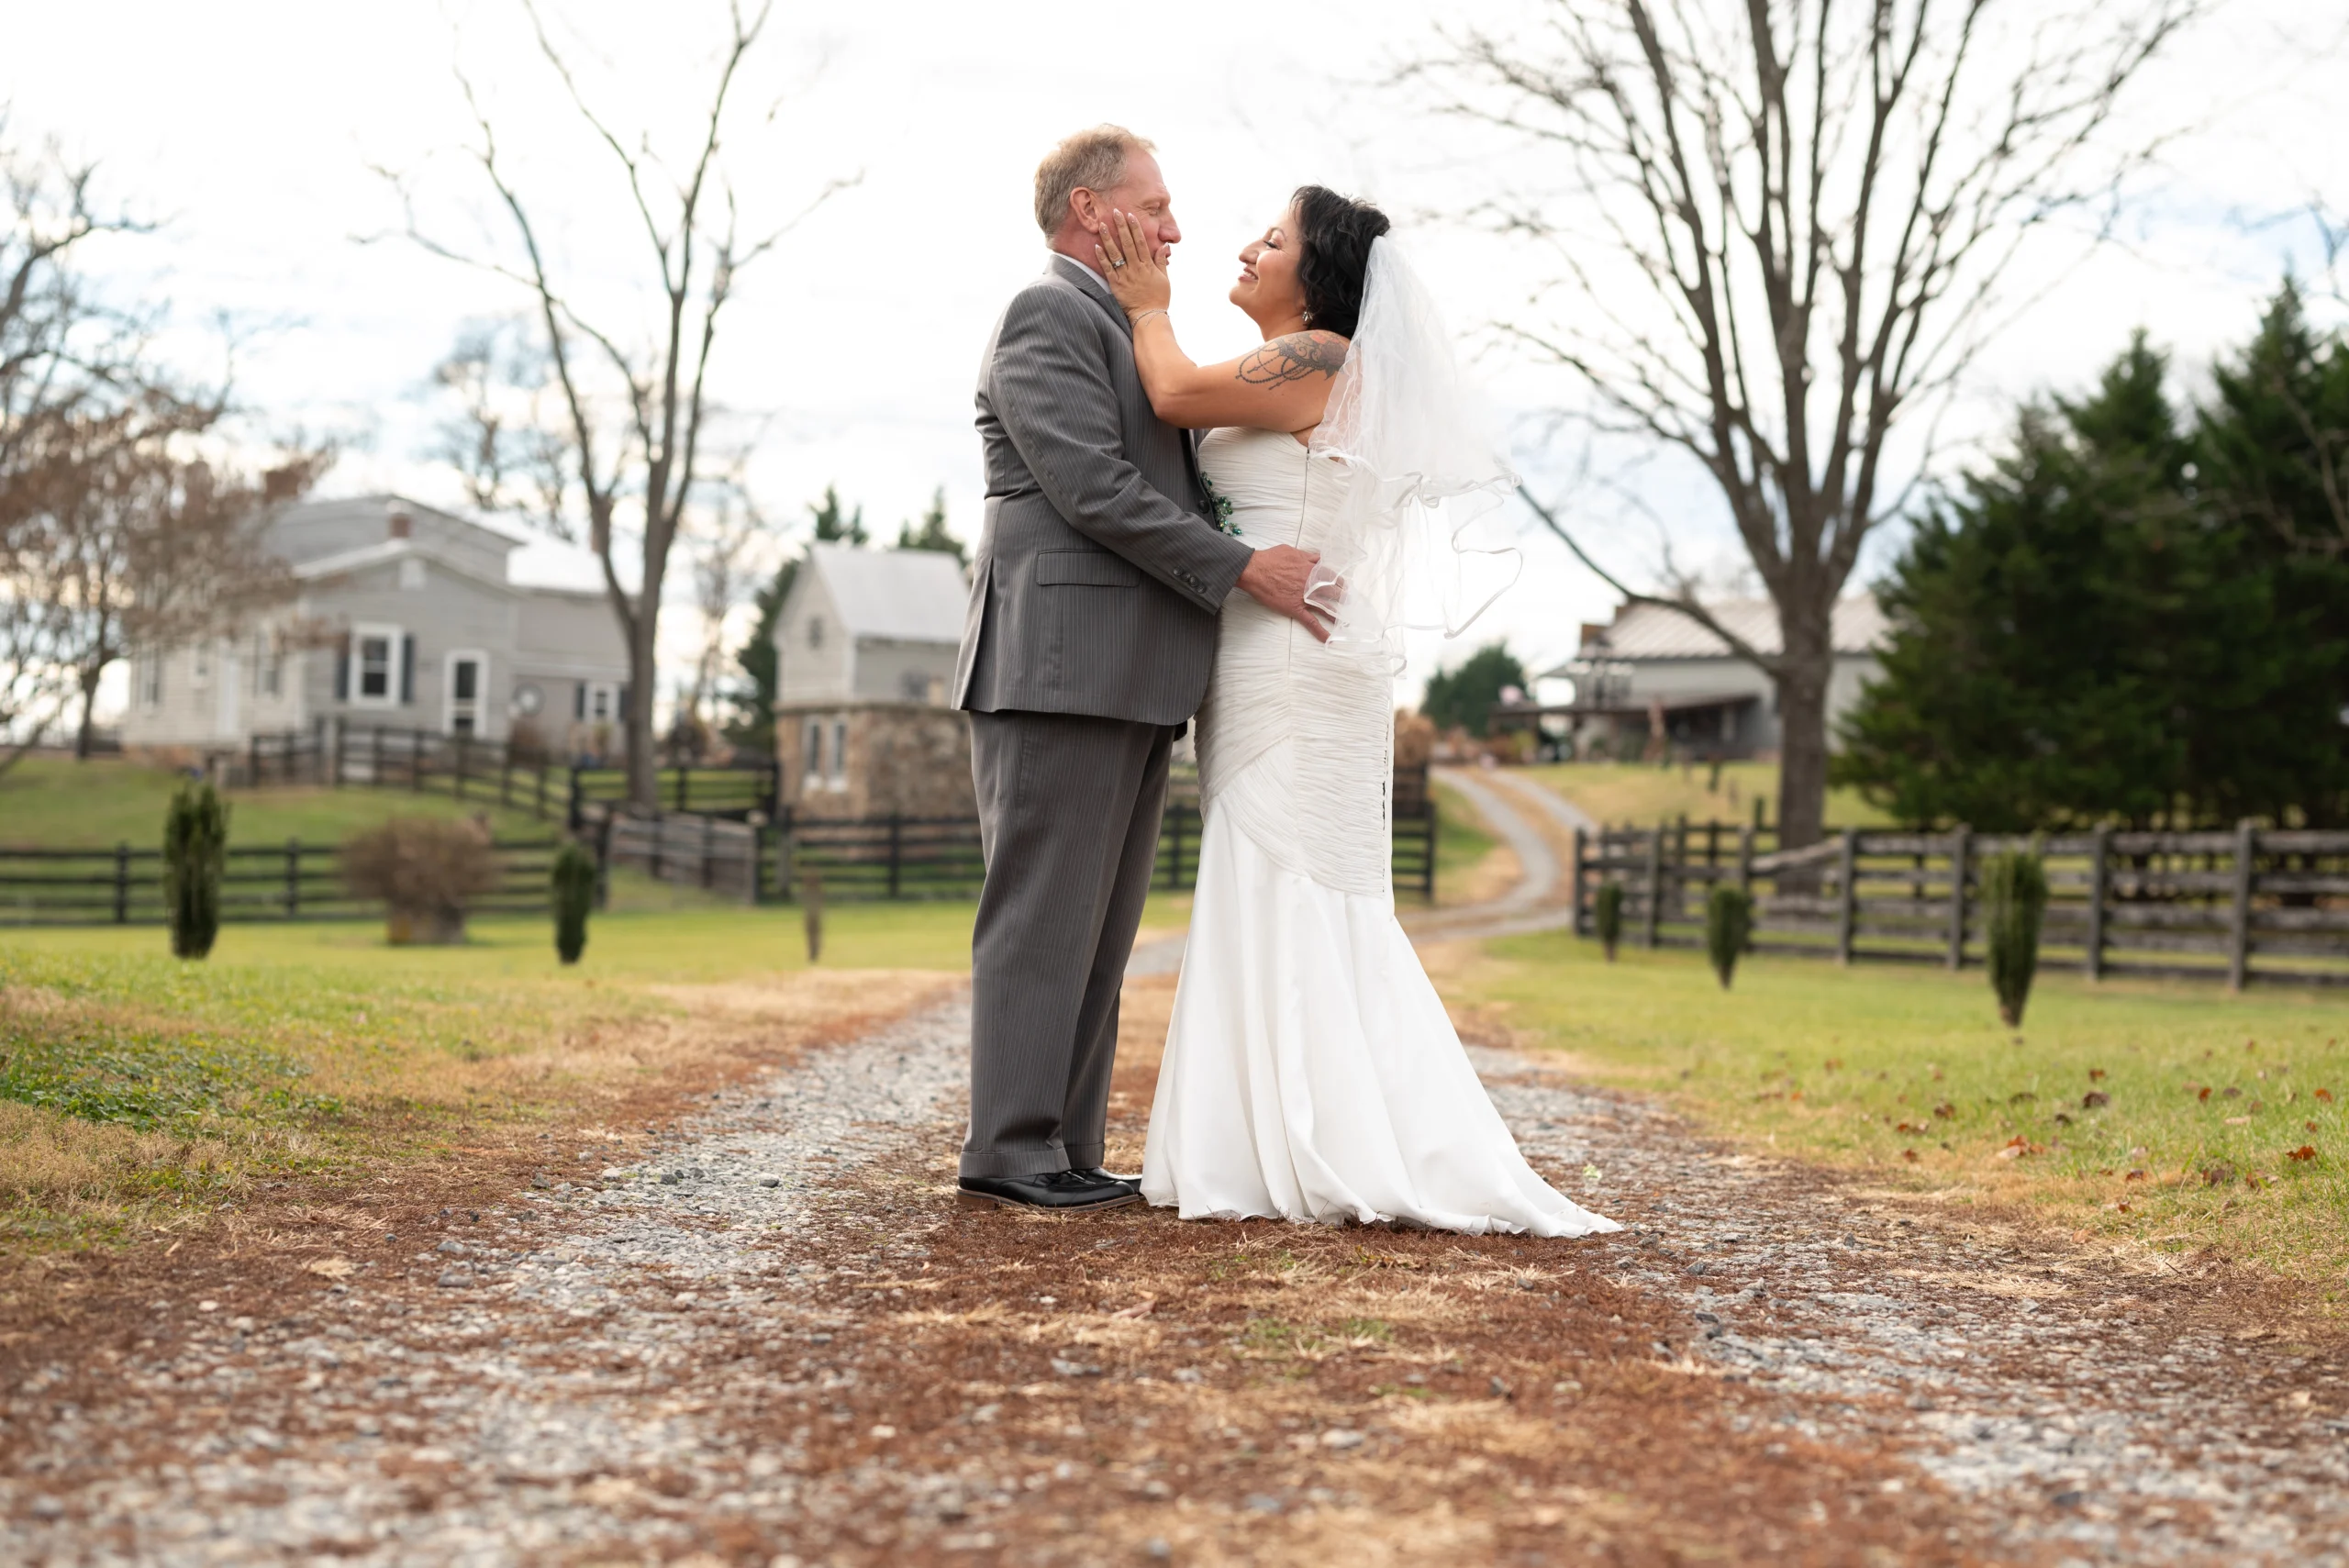 Featured image for “Tie the Knot with Lake Anna’s Scenic Charm”